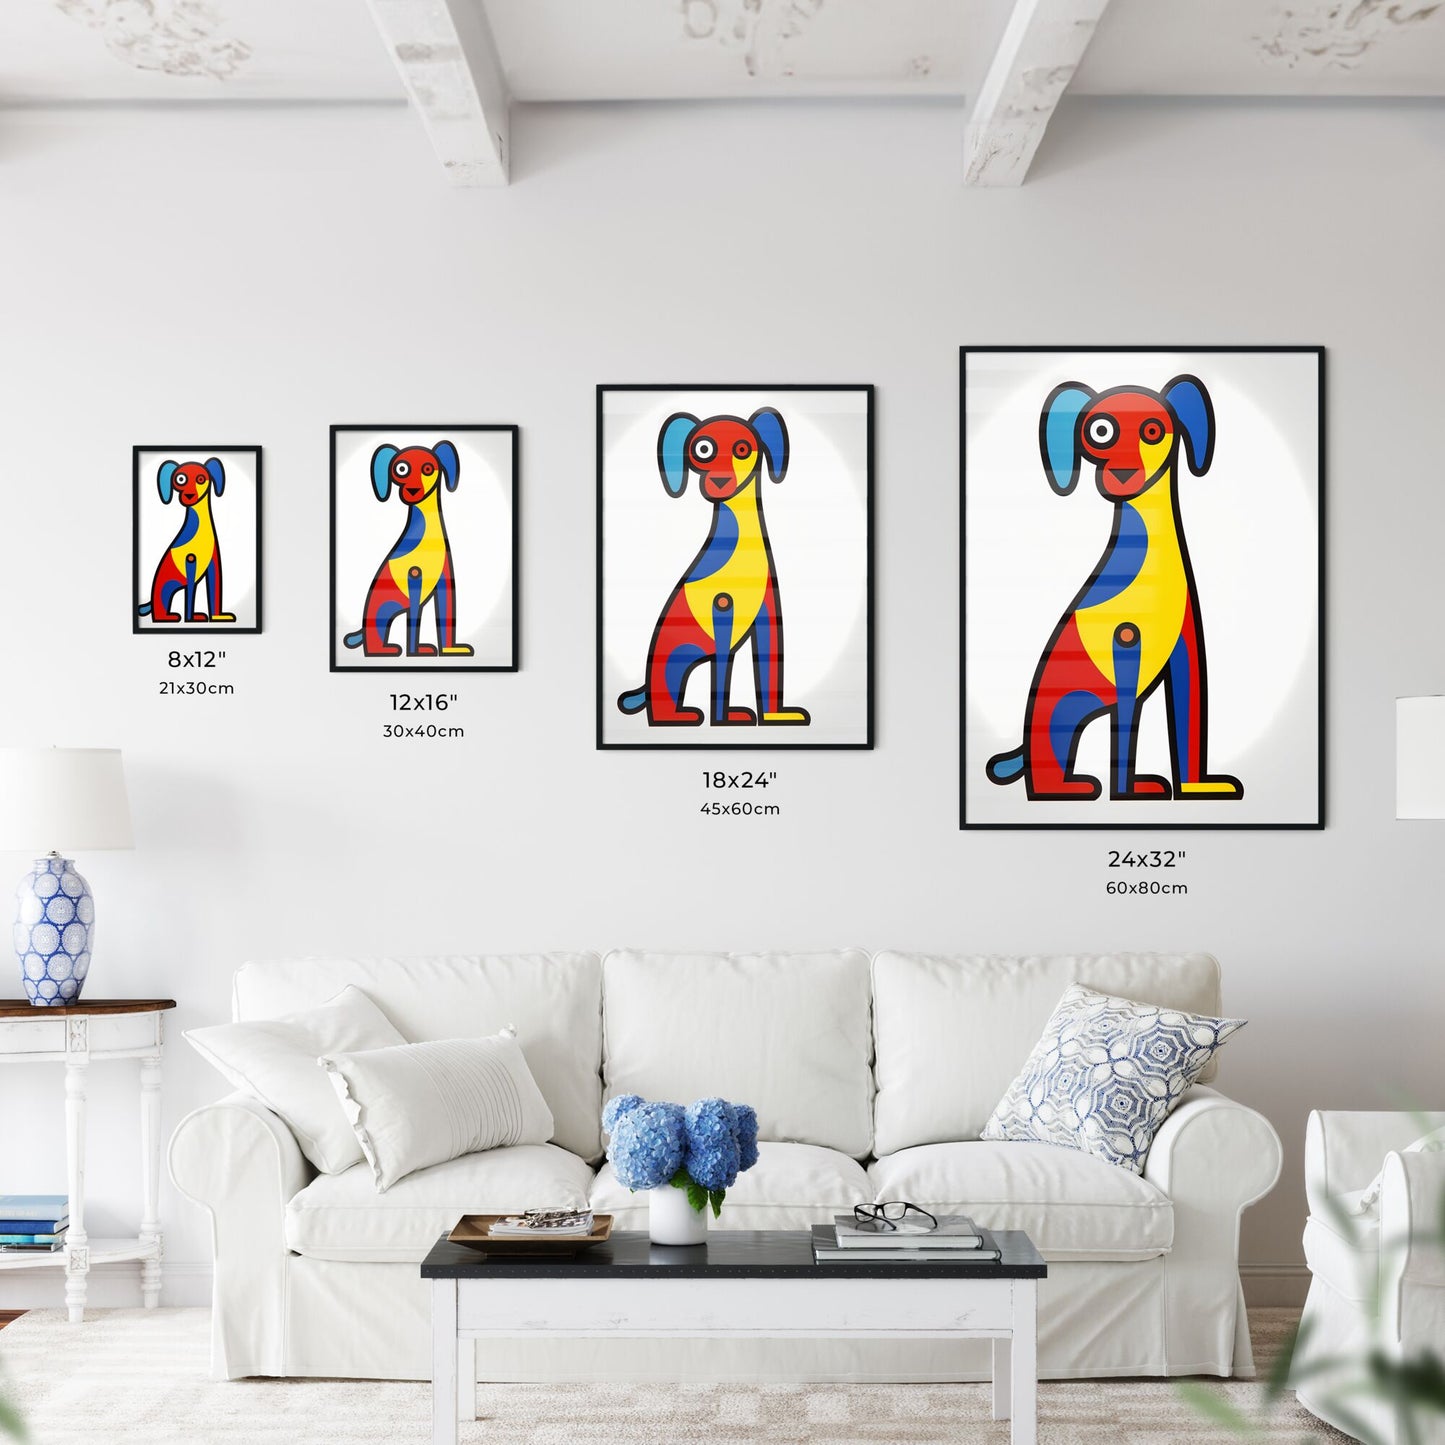 A Poster of minimalist dog art - A Colorful Dog With Blue And Red Ears Default Title